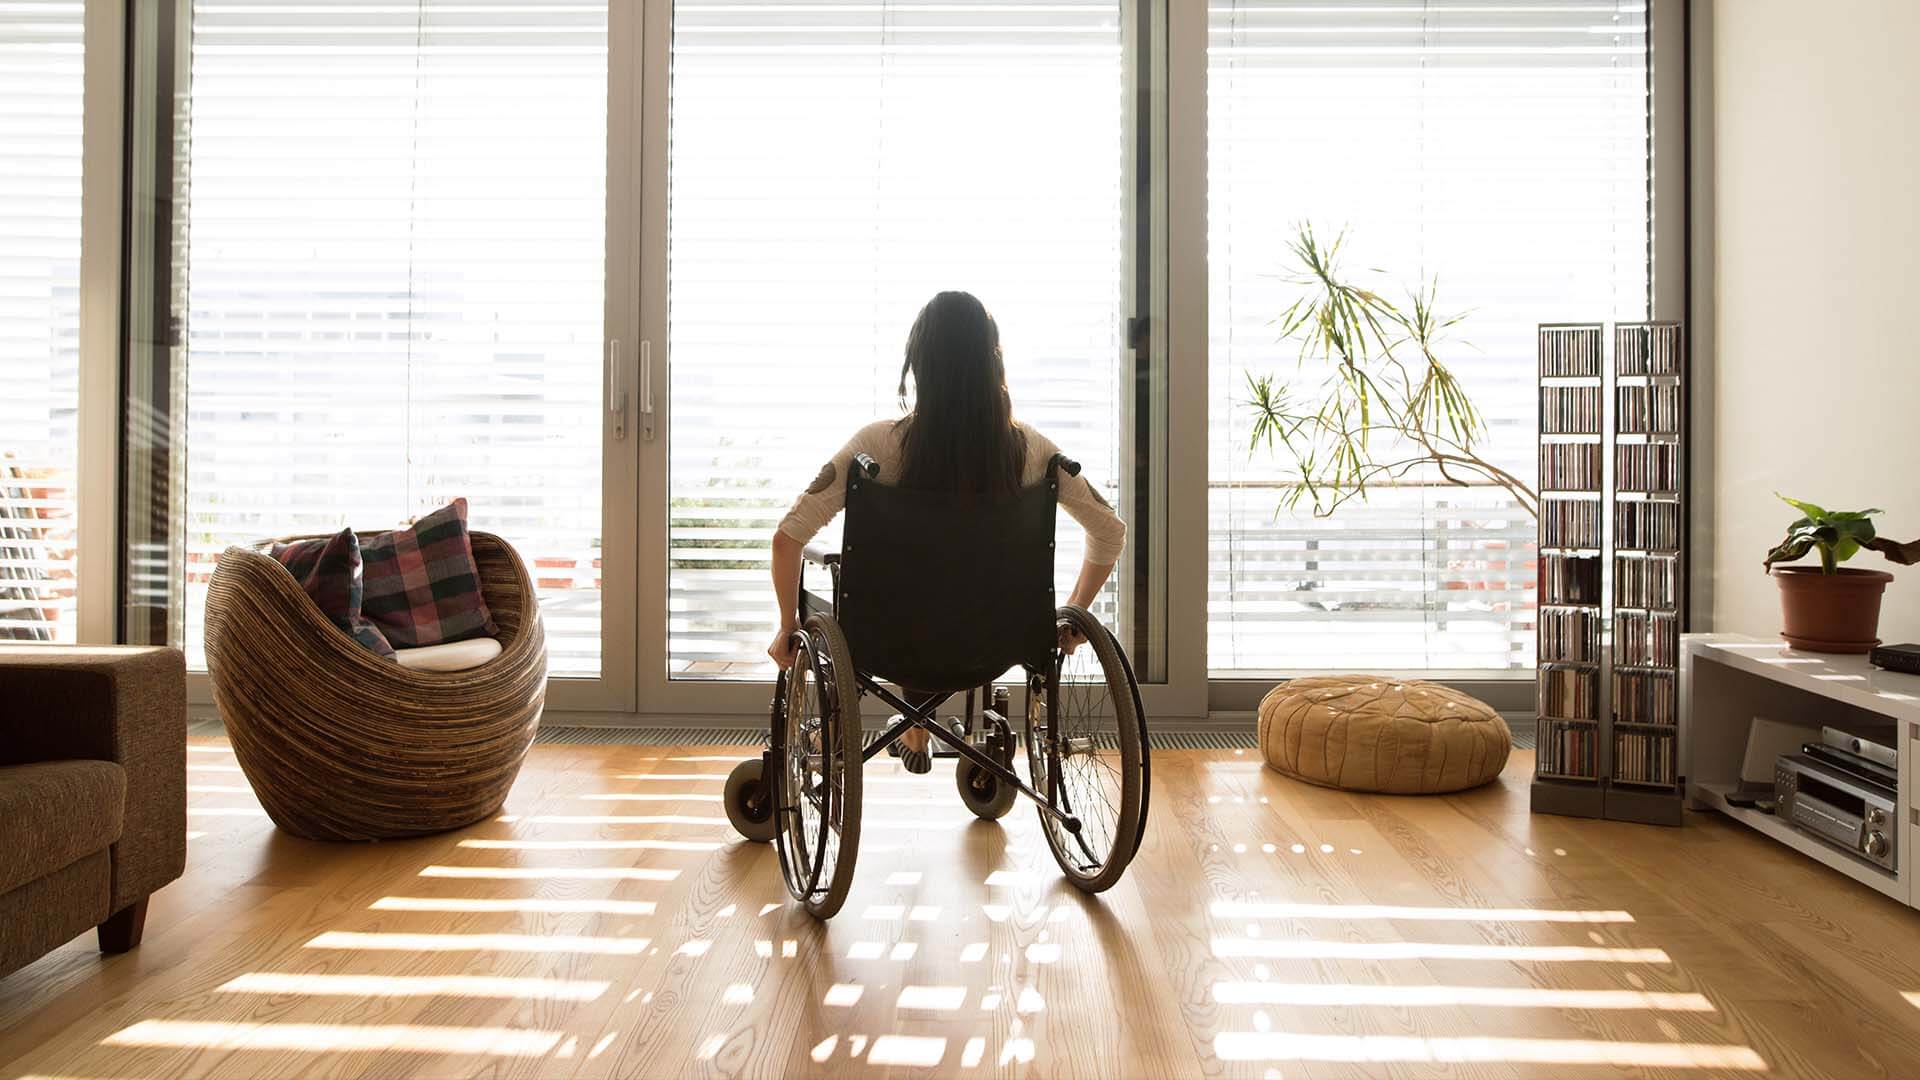 A young woman sits in a wheelchair in her home after suffering spinal cord injury caused by an accident